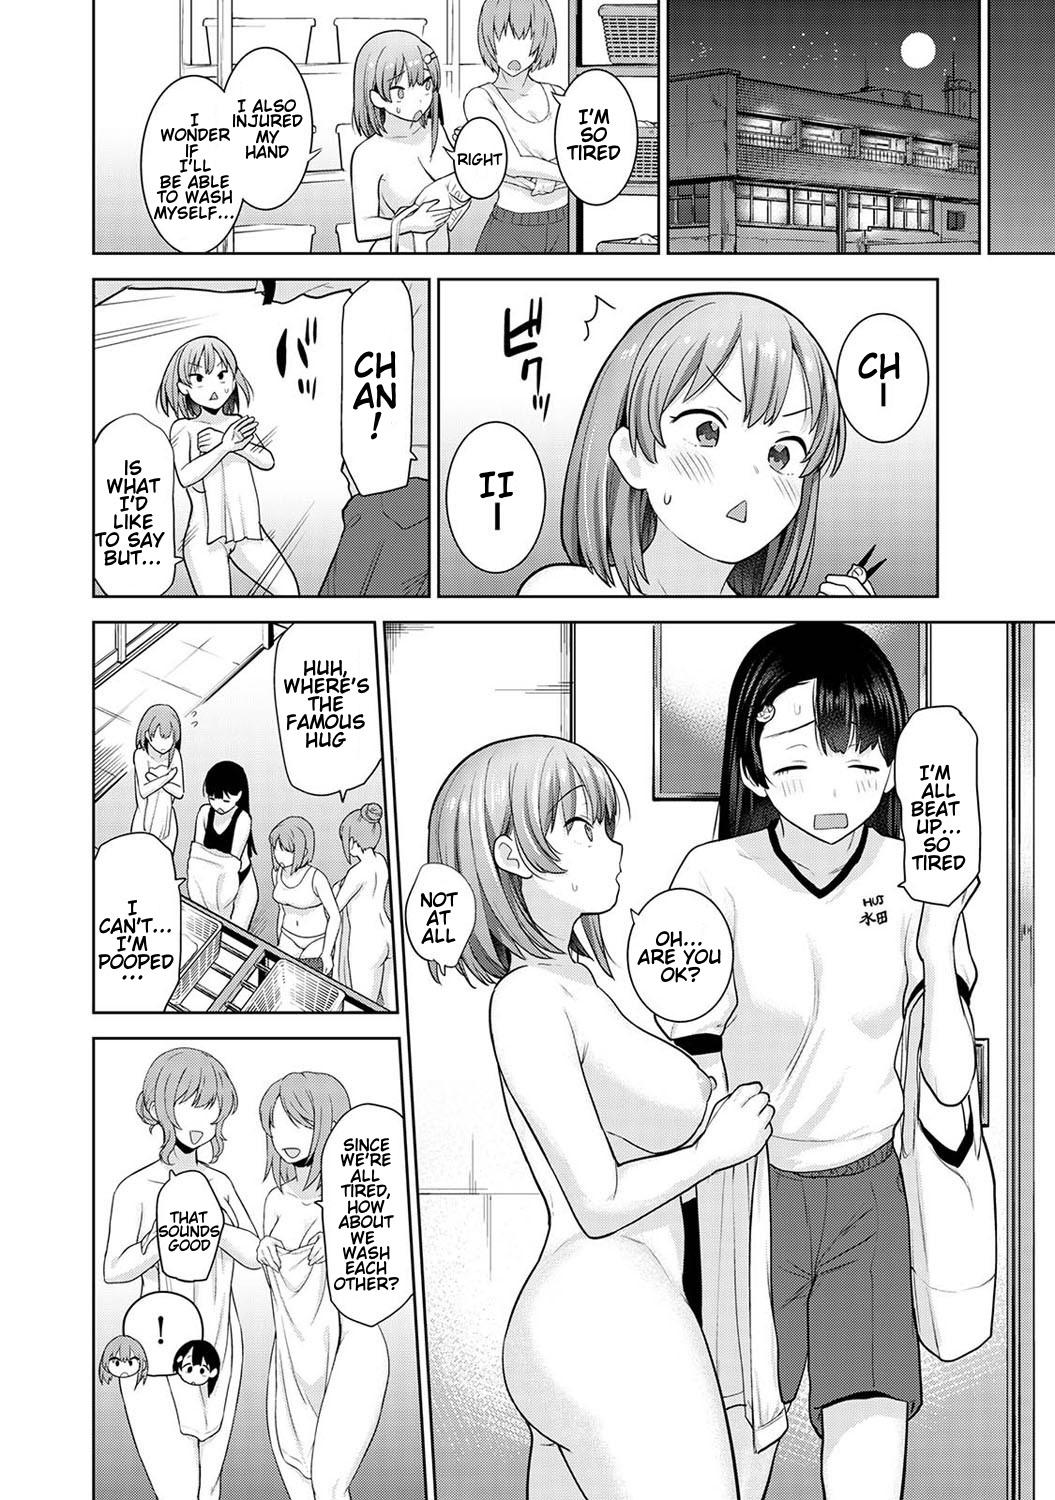 SotsuAl Cameraman to Shite Ichinenkan Joshikou no Event e Doukou Suru Koto ni Natta Hanashi | A Story About How I Ended Up Being A Yearbook Cameraman at an All Girls' School For A Year Ch. 6 22